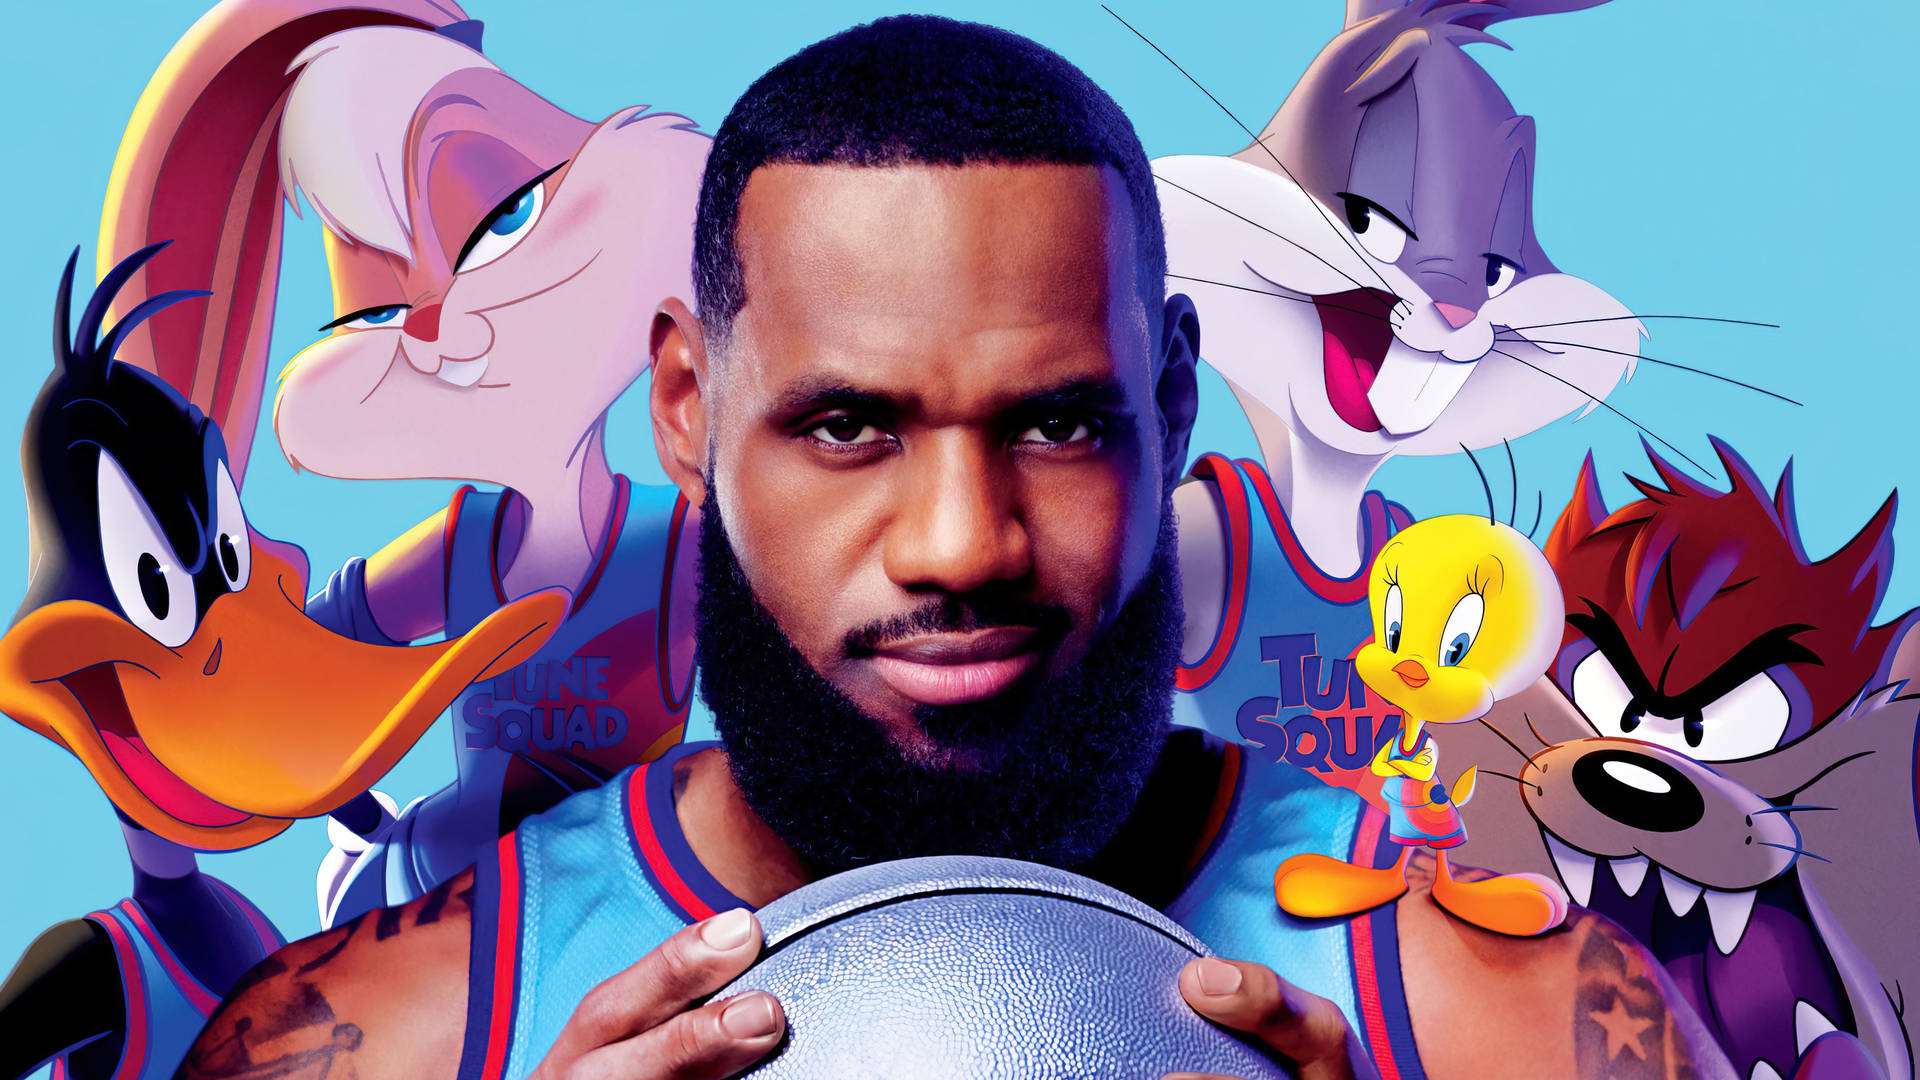 Catch a glimpse of the upcoming Space Jam 2! Wallpaper